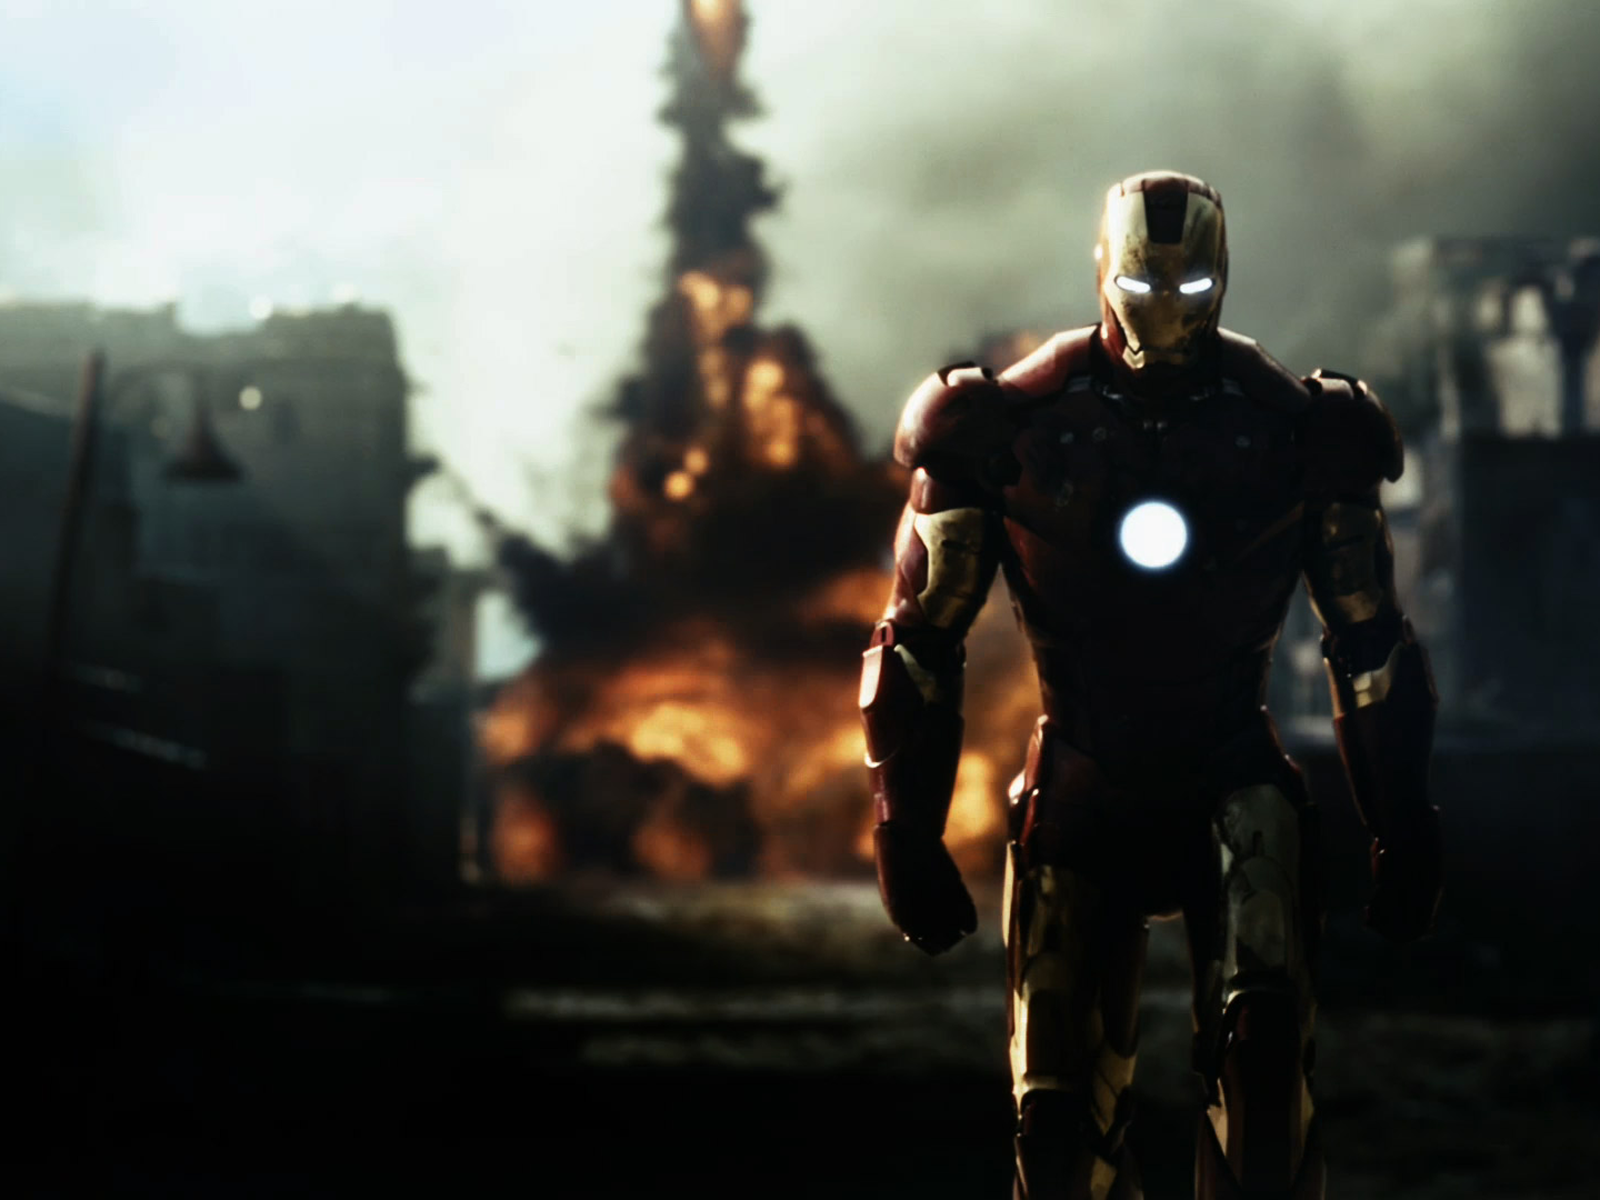 for ios download Iron Man 3